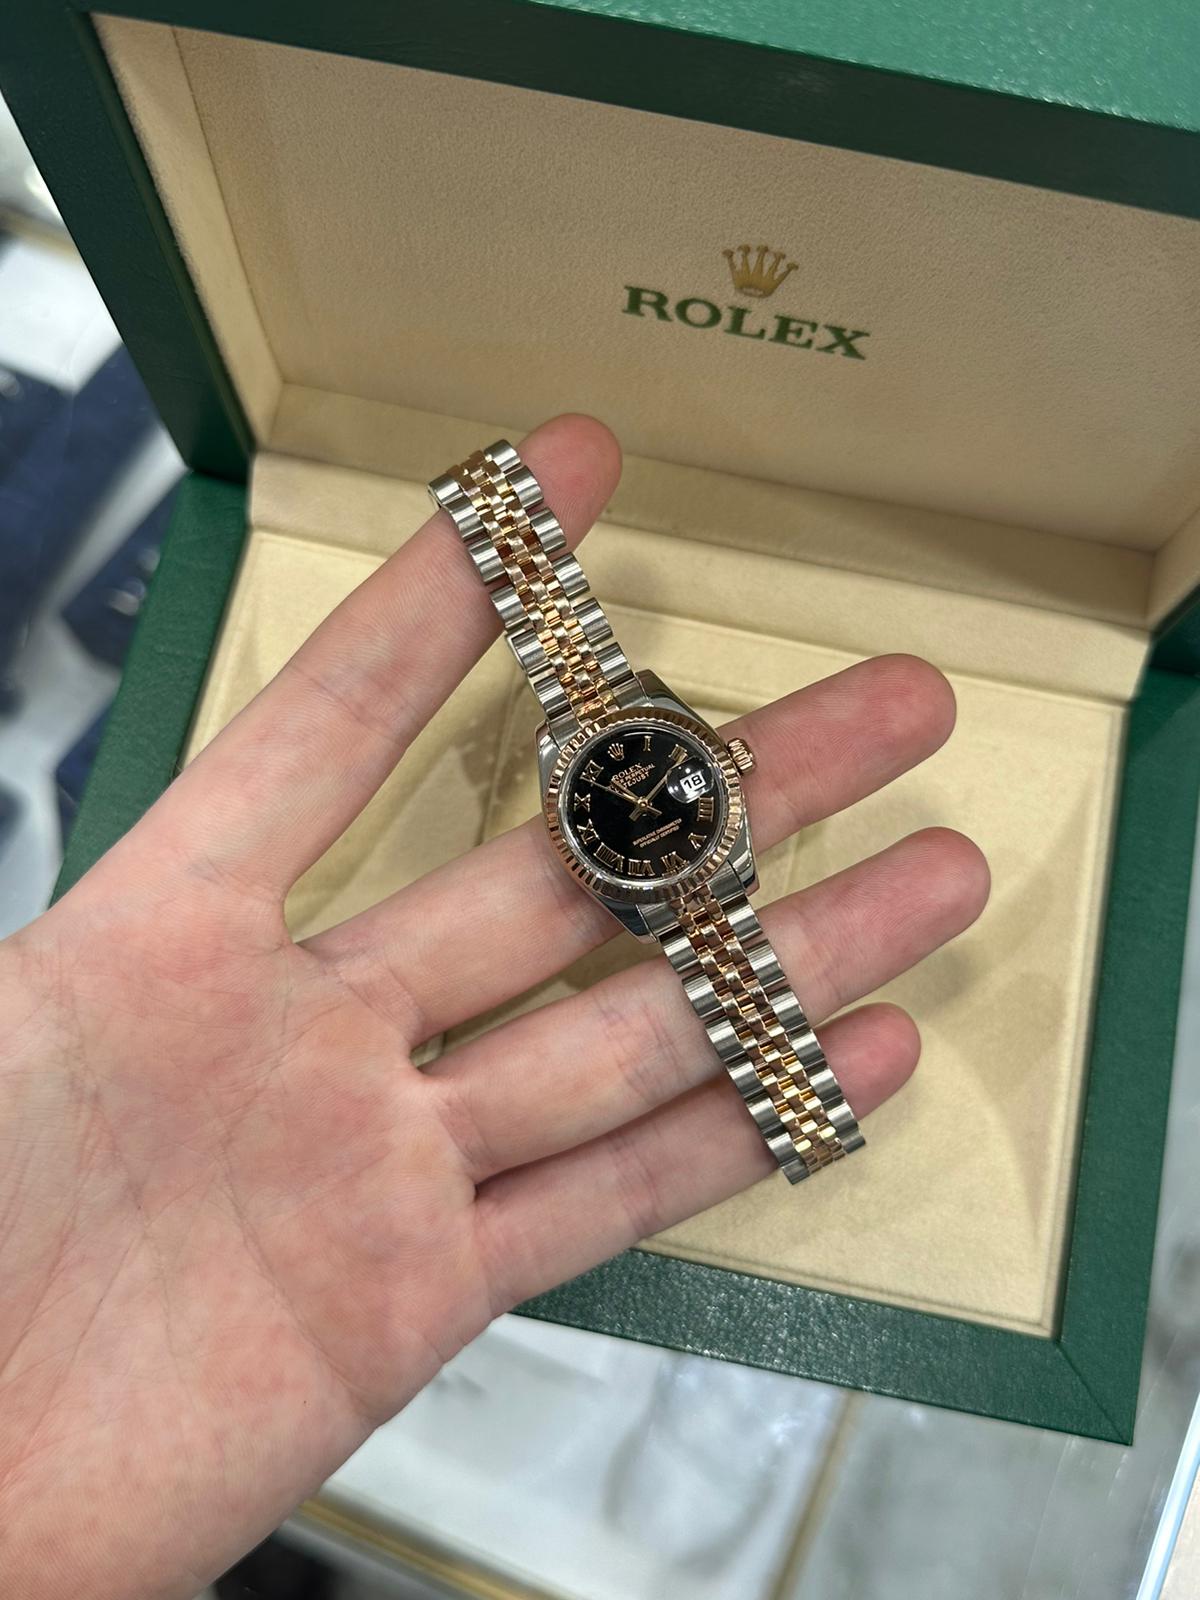 Rolex Datejust 26mm steel and rose gold - 179171 2 - Image 10 of 10